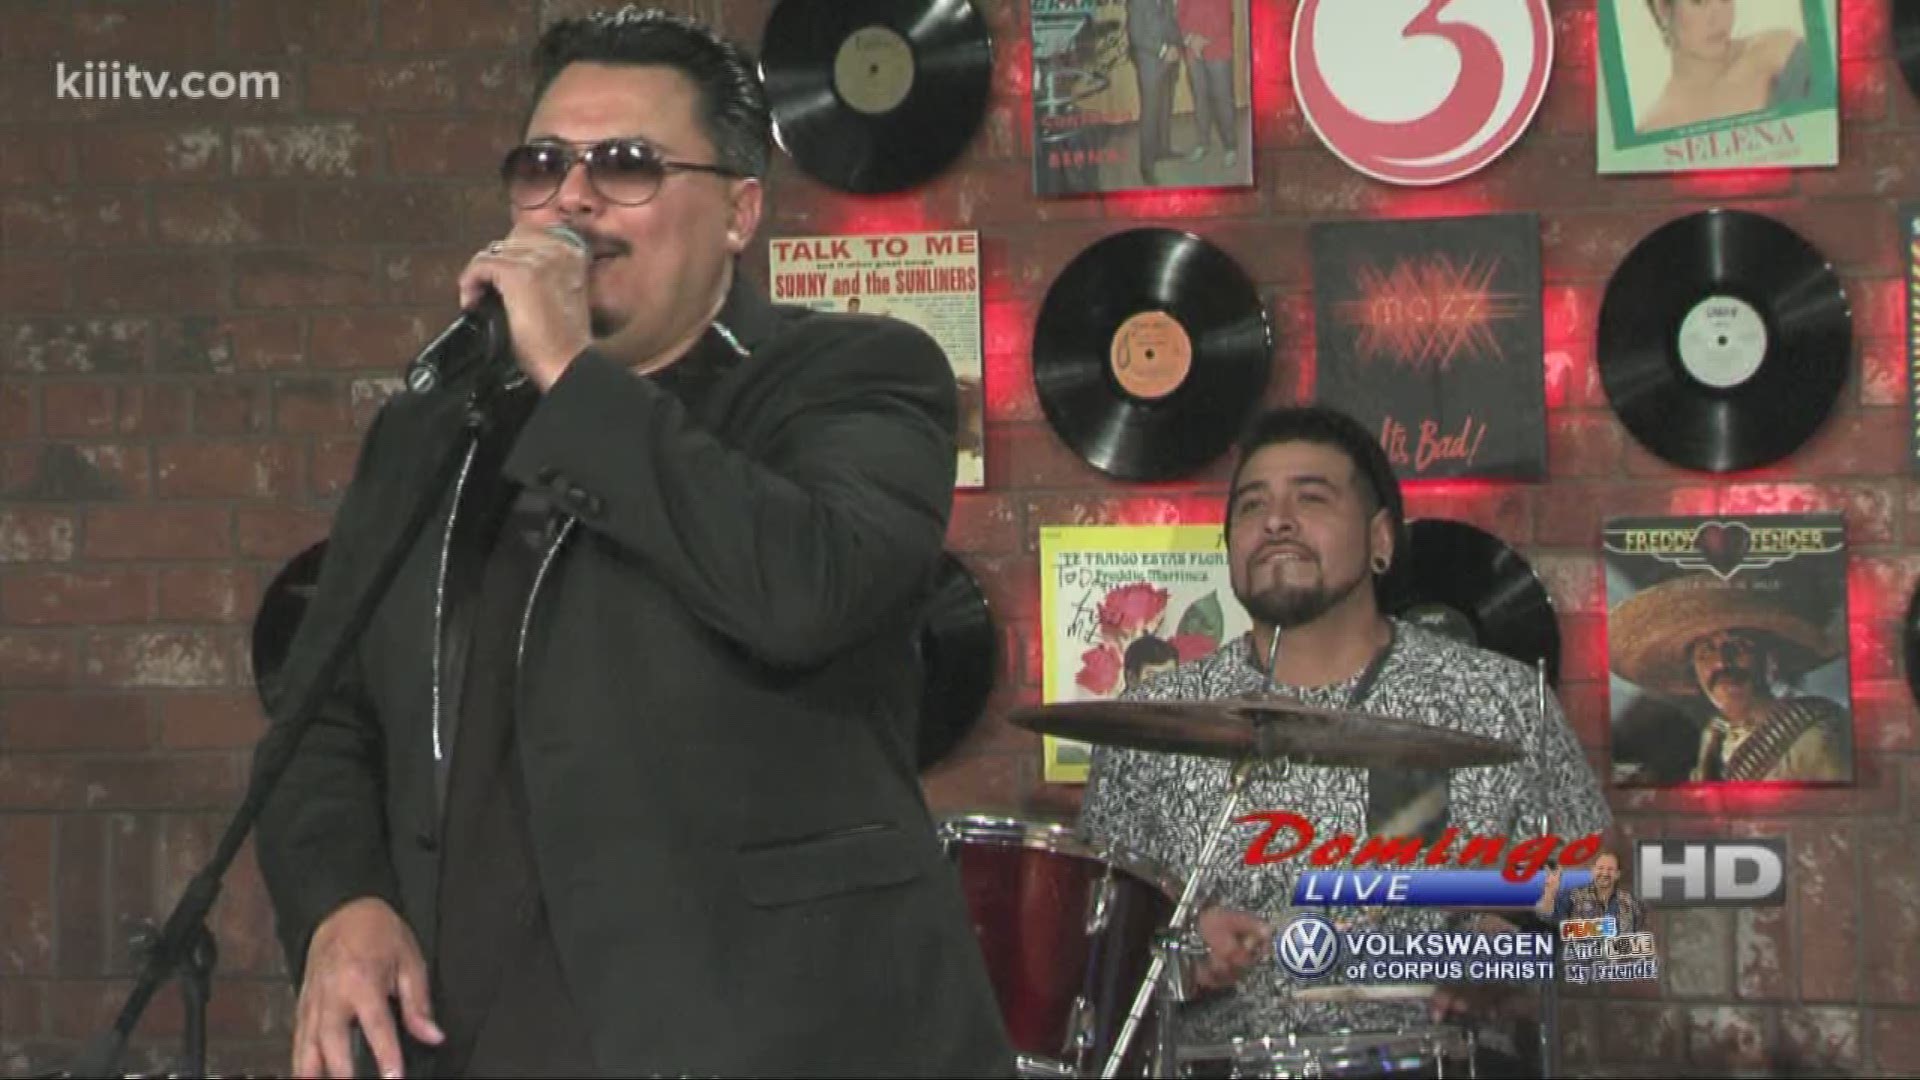 Rick Fuentes And The Brown Express performing "Rayito De Luna" on Domingo Live.